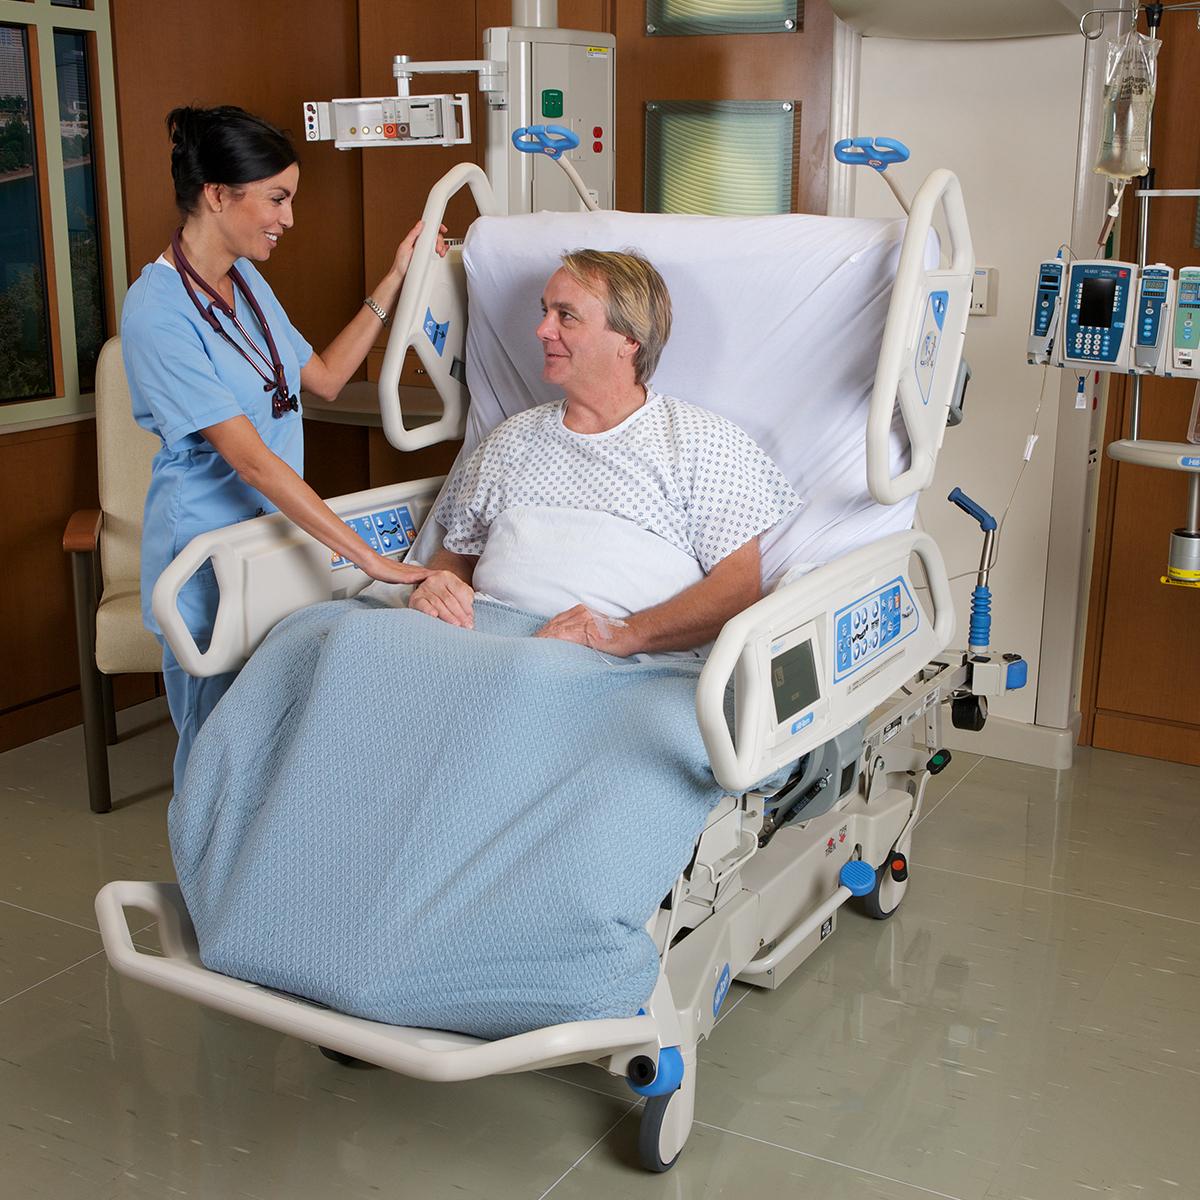 A patient sitting in the TotalCare SpO2RT 2 ICU Bed is comforted by his clinician